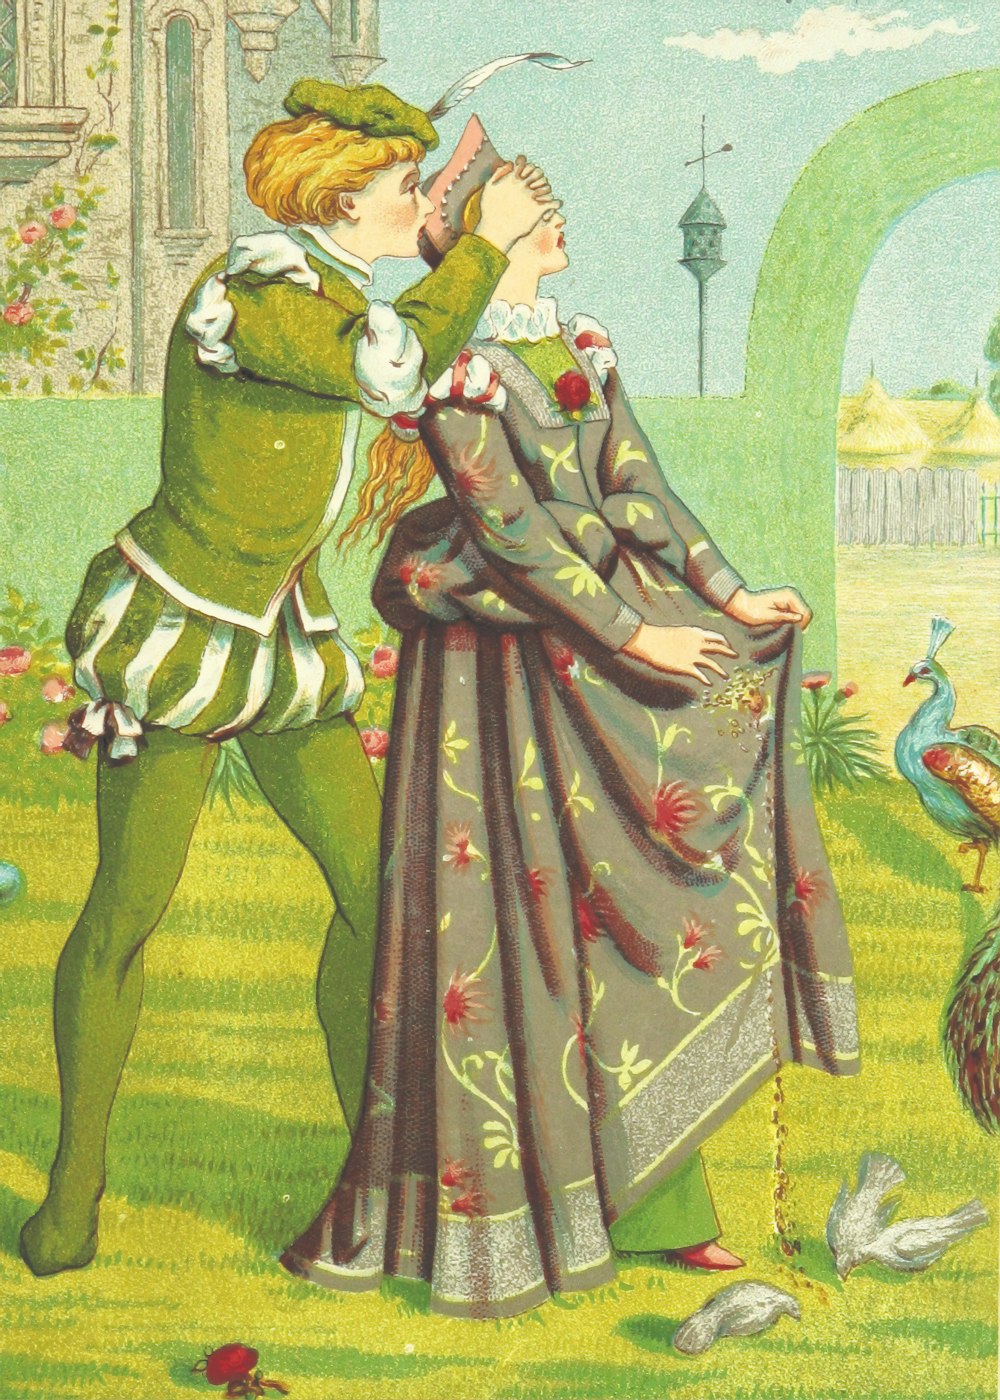 man in green and brown dress holding a woman in red dress painting